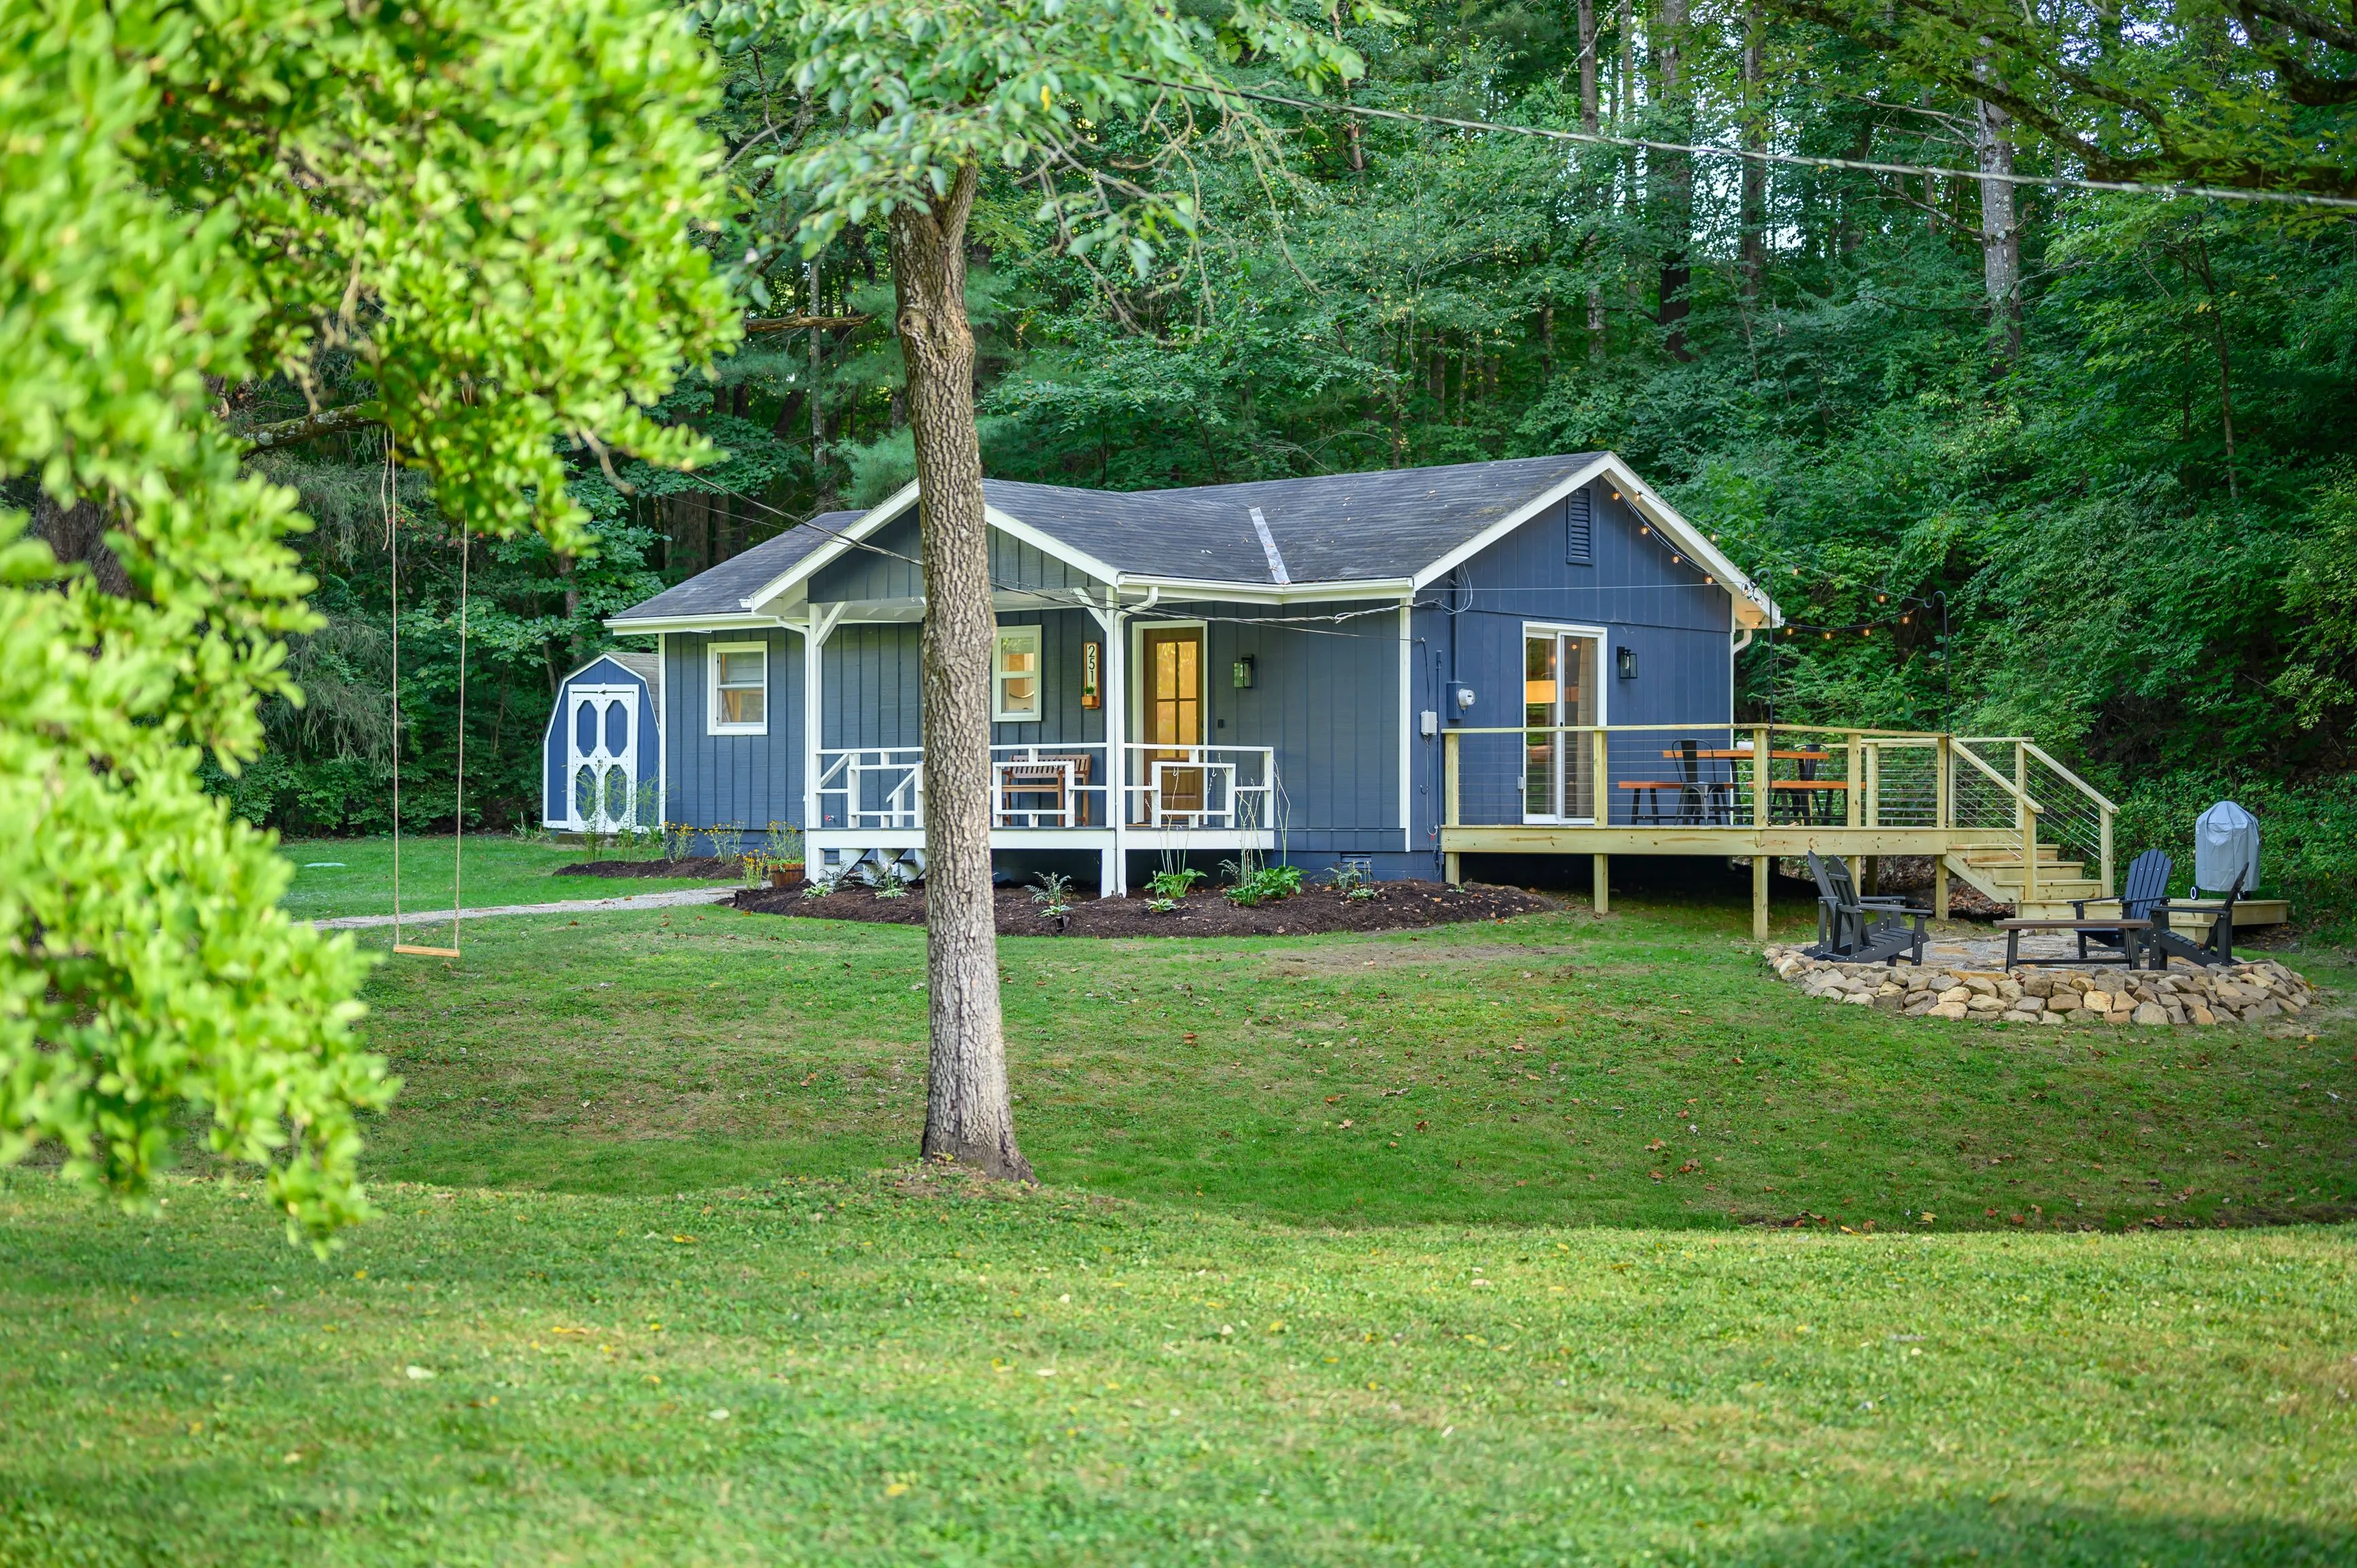 A cozy grey house with white trim and a front porch, nestled in a green lawn with surrounding trees, featuring a wooden swing and a fire pit area with chairs.